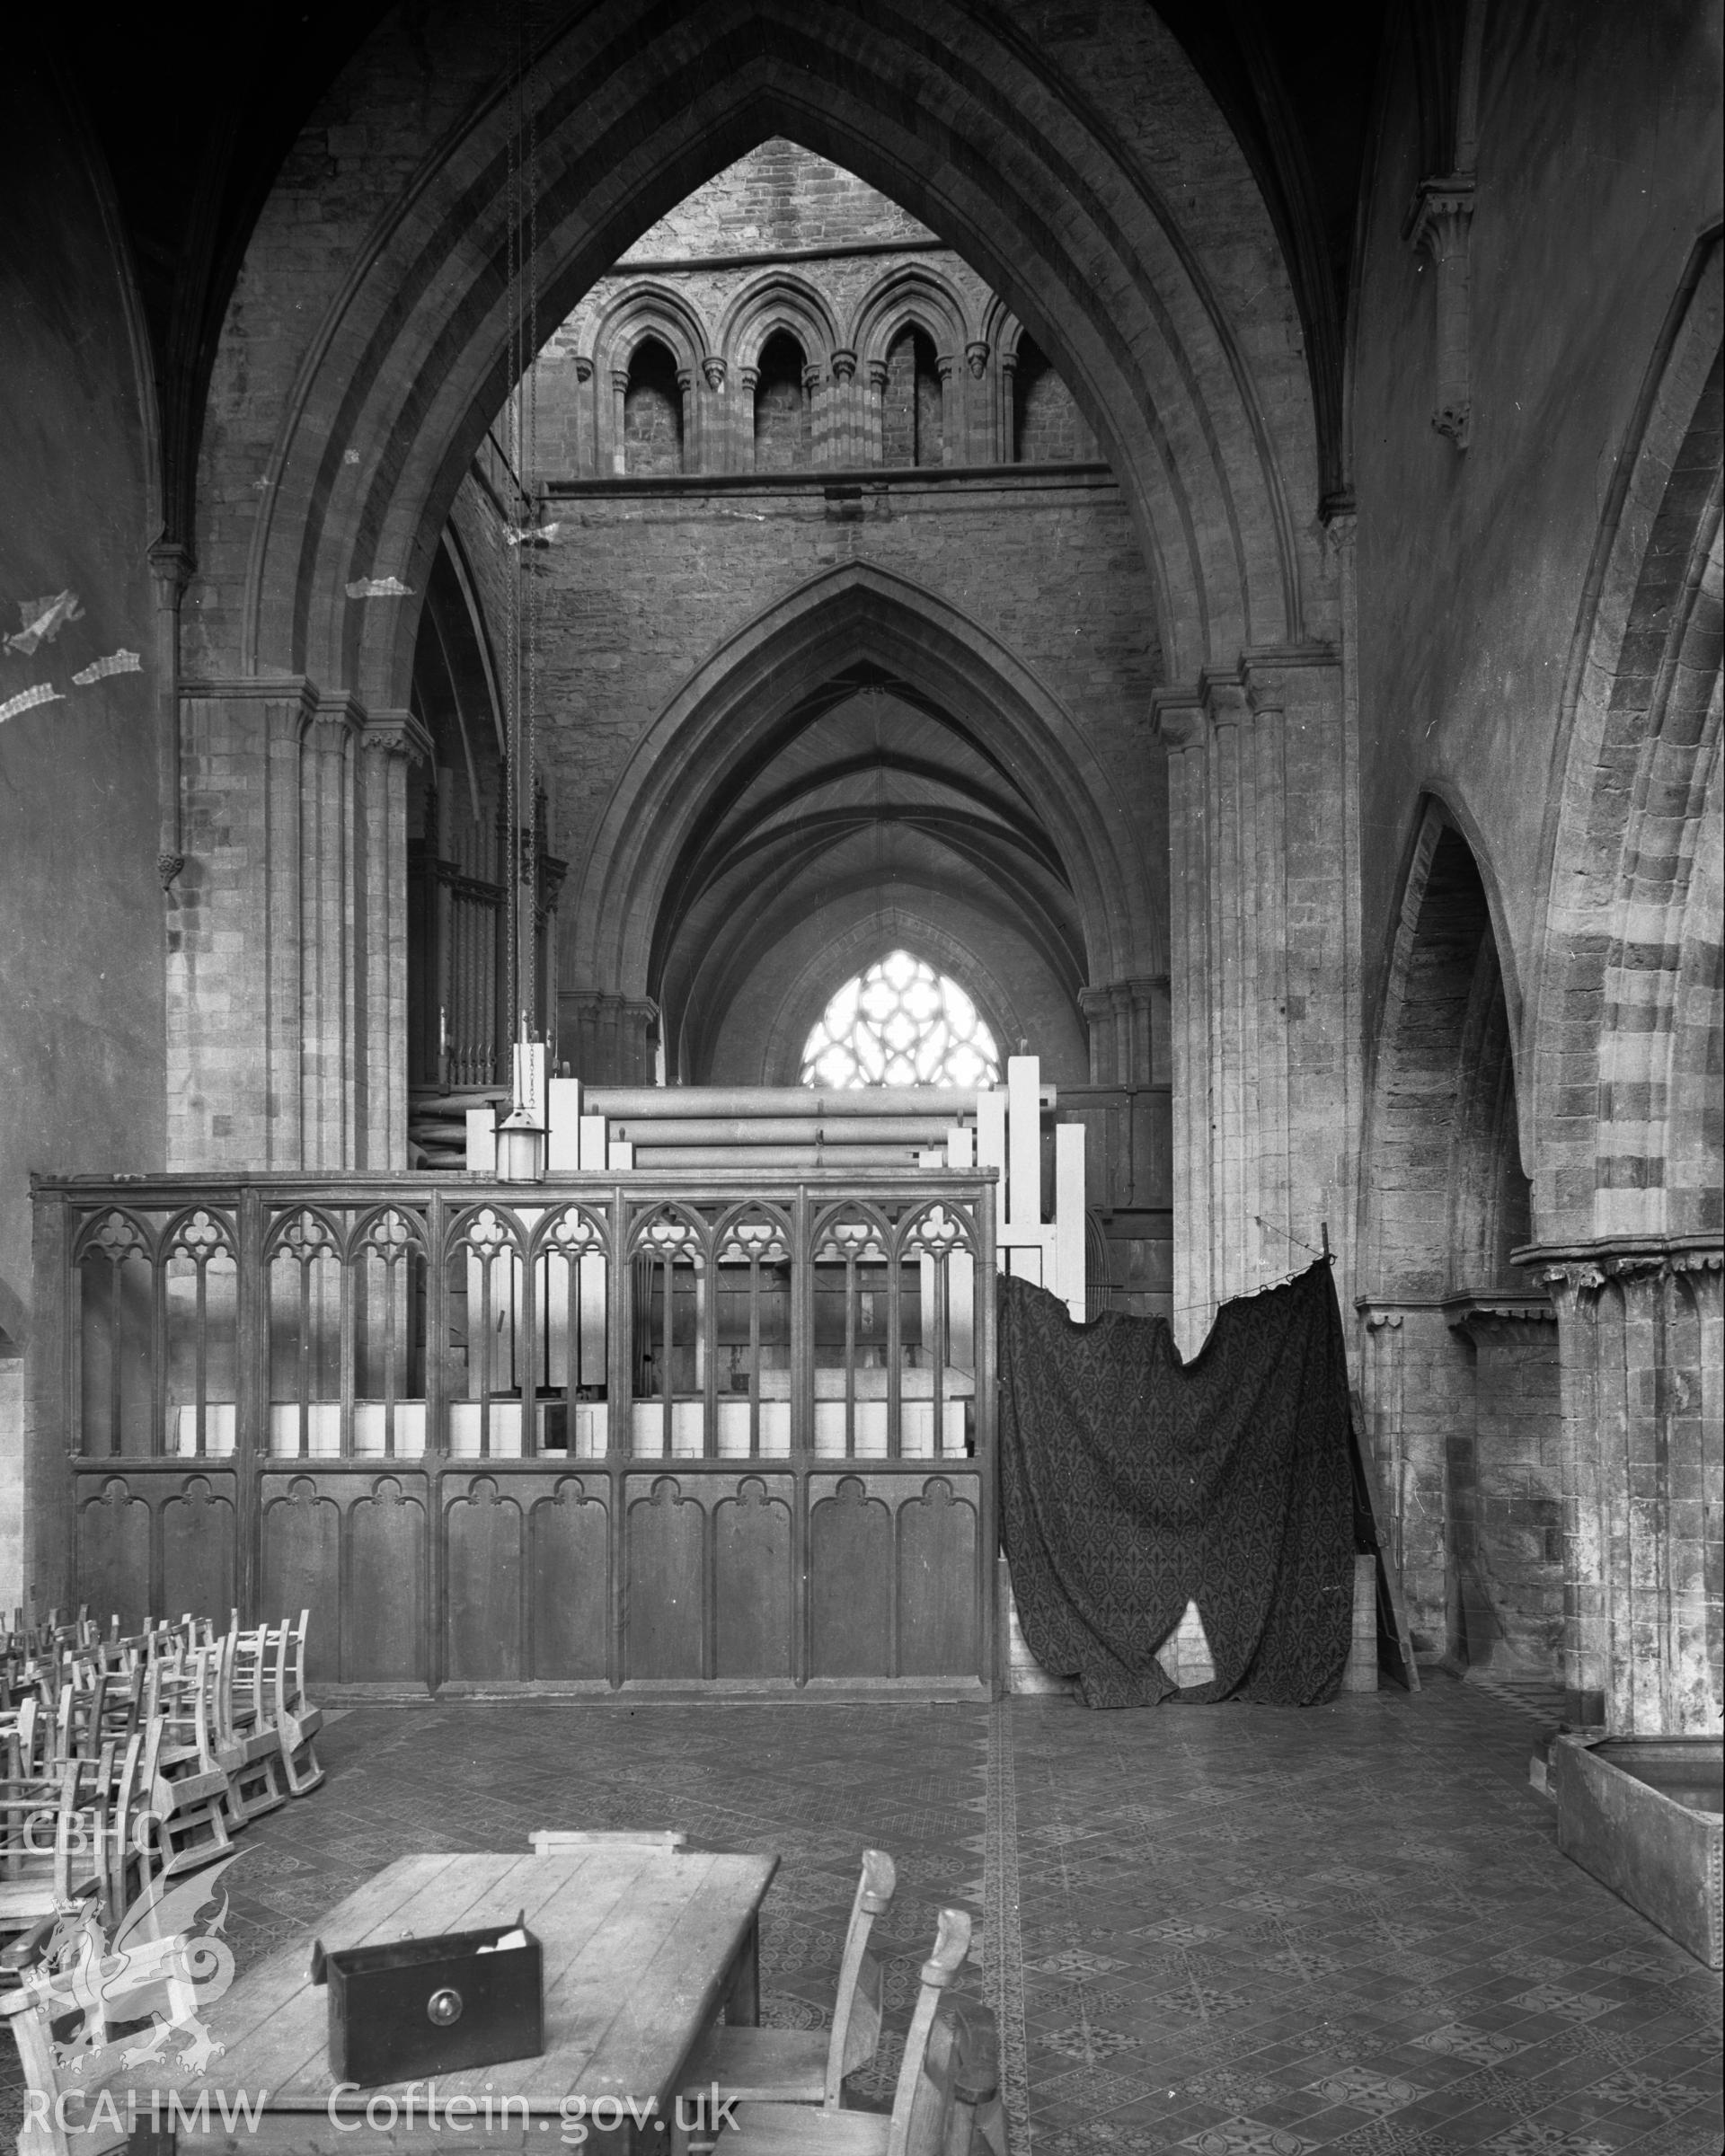 Interior view showing south tower arch from the south transept.